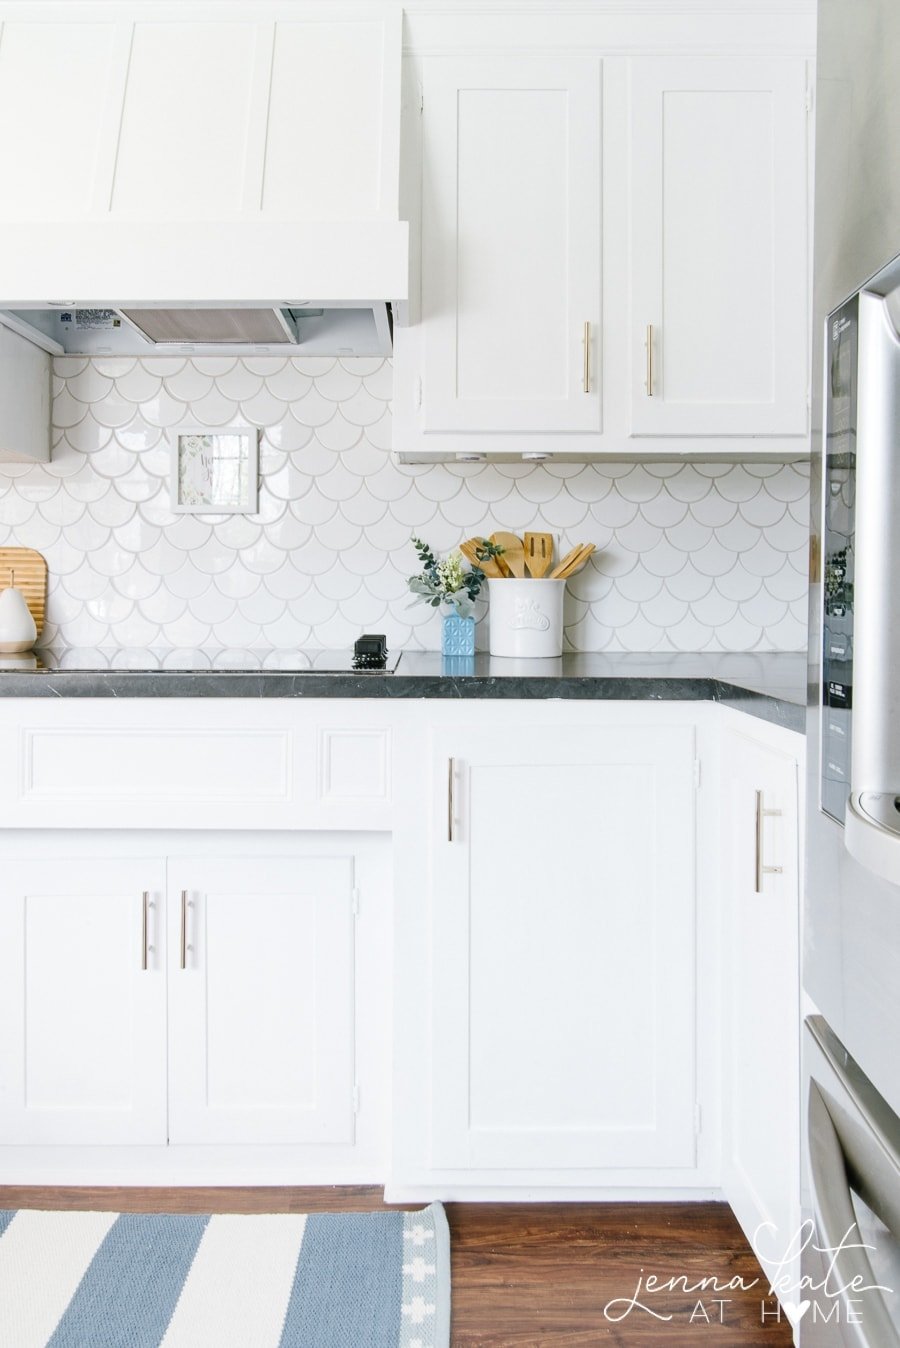 A stovetop built into the cupboard with decorative hood, with stainless steel fridge nearby, white scalloped backsplash with white cabinets